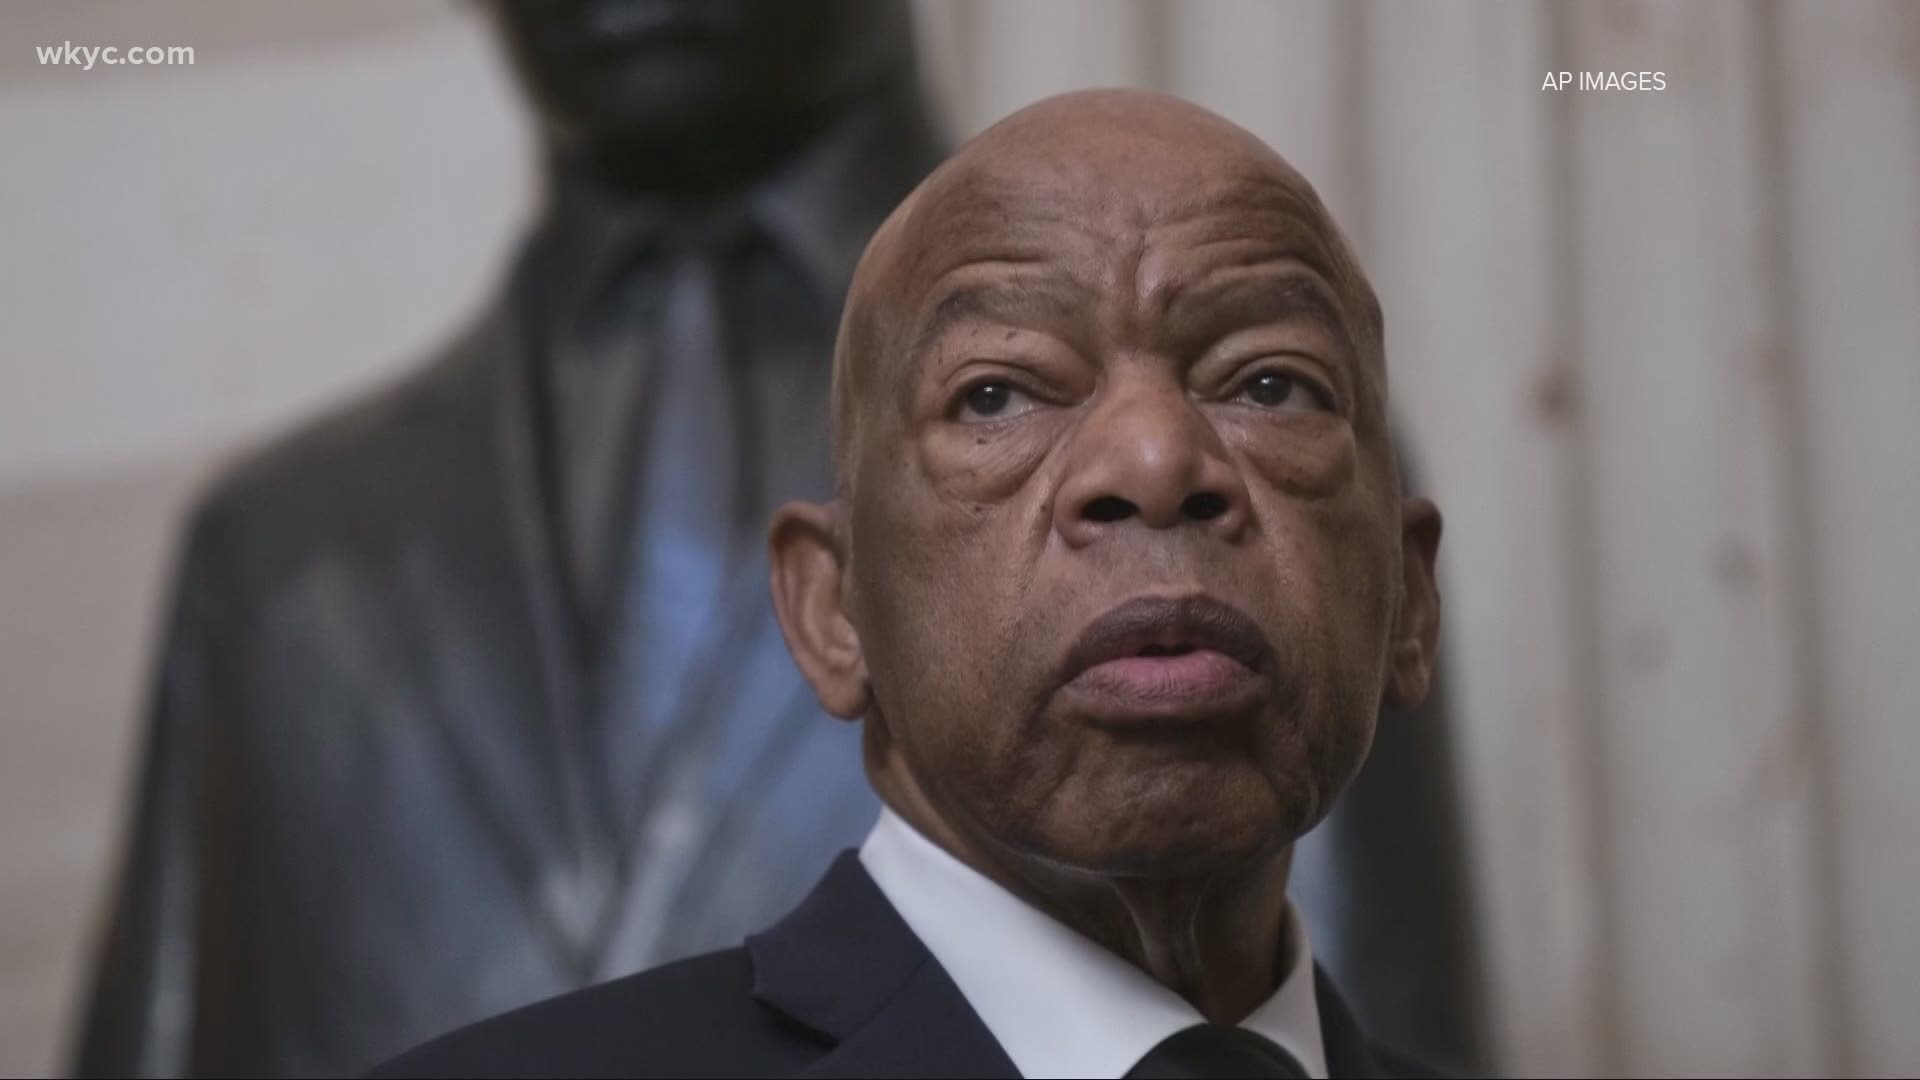 John Lewis was the embodiment of courage and commitment toward justice. He was a crusader for right. Of John Lewis, we mourn his passing.